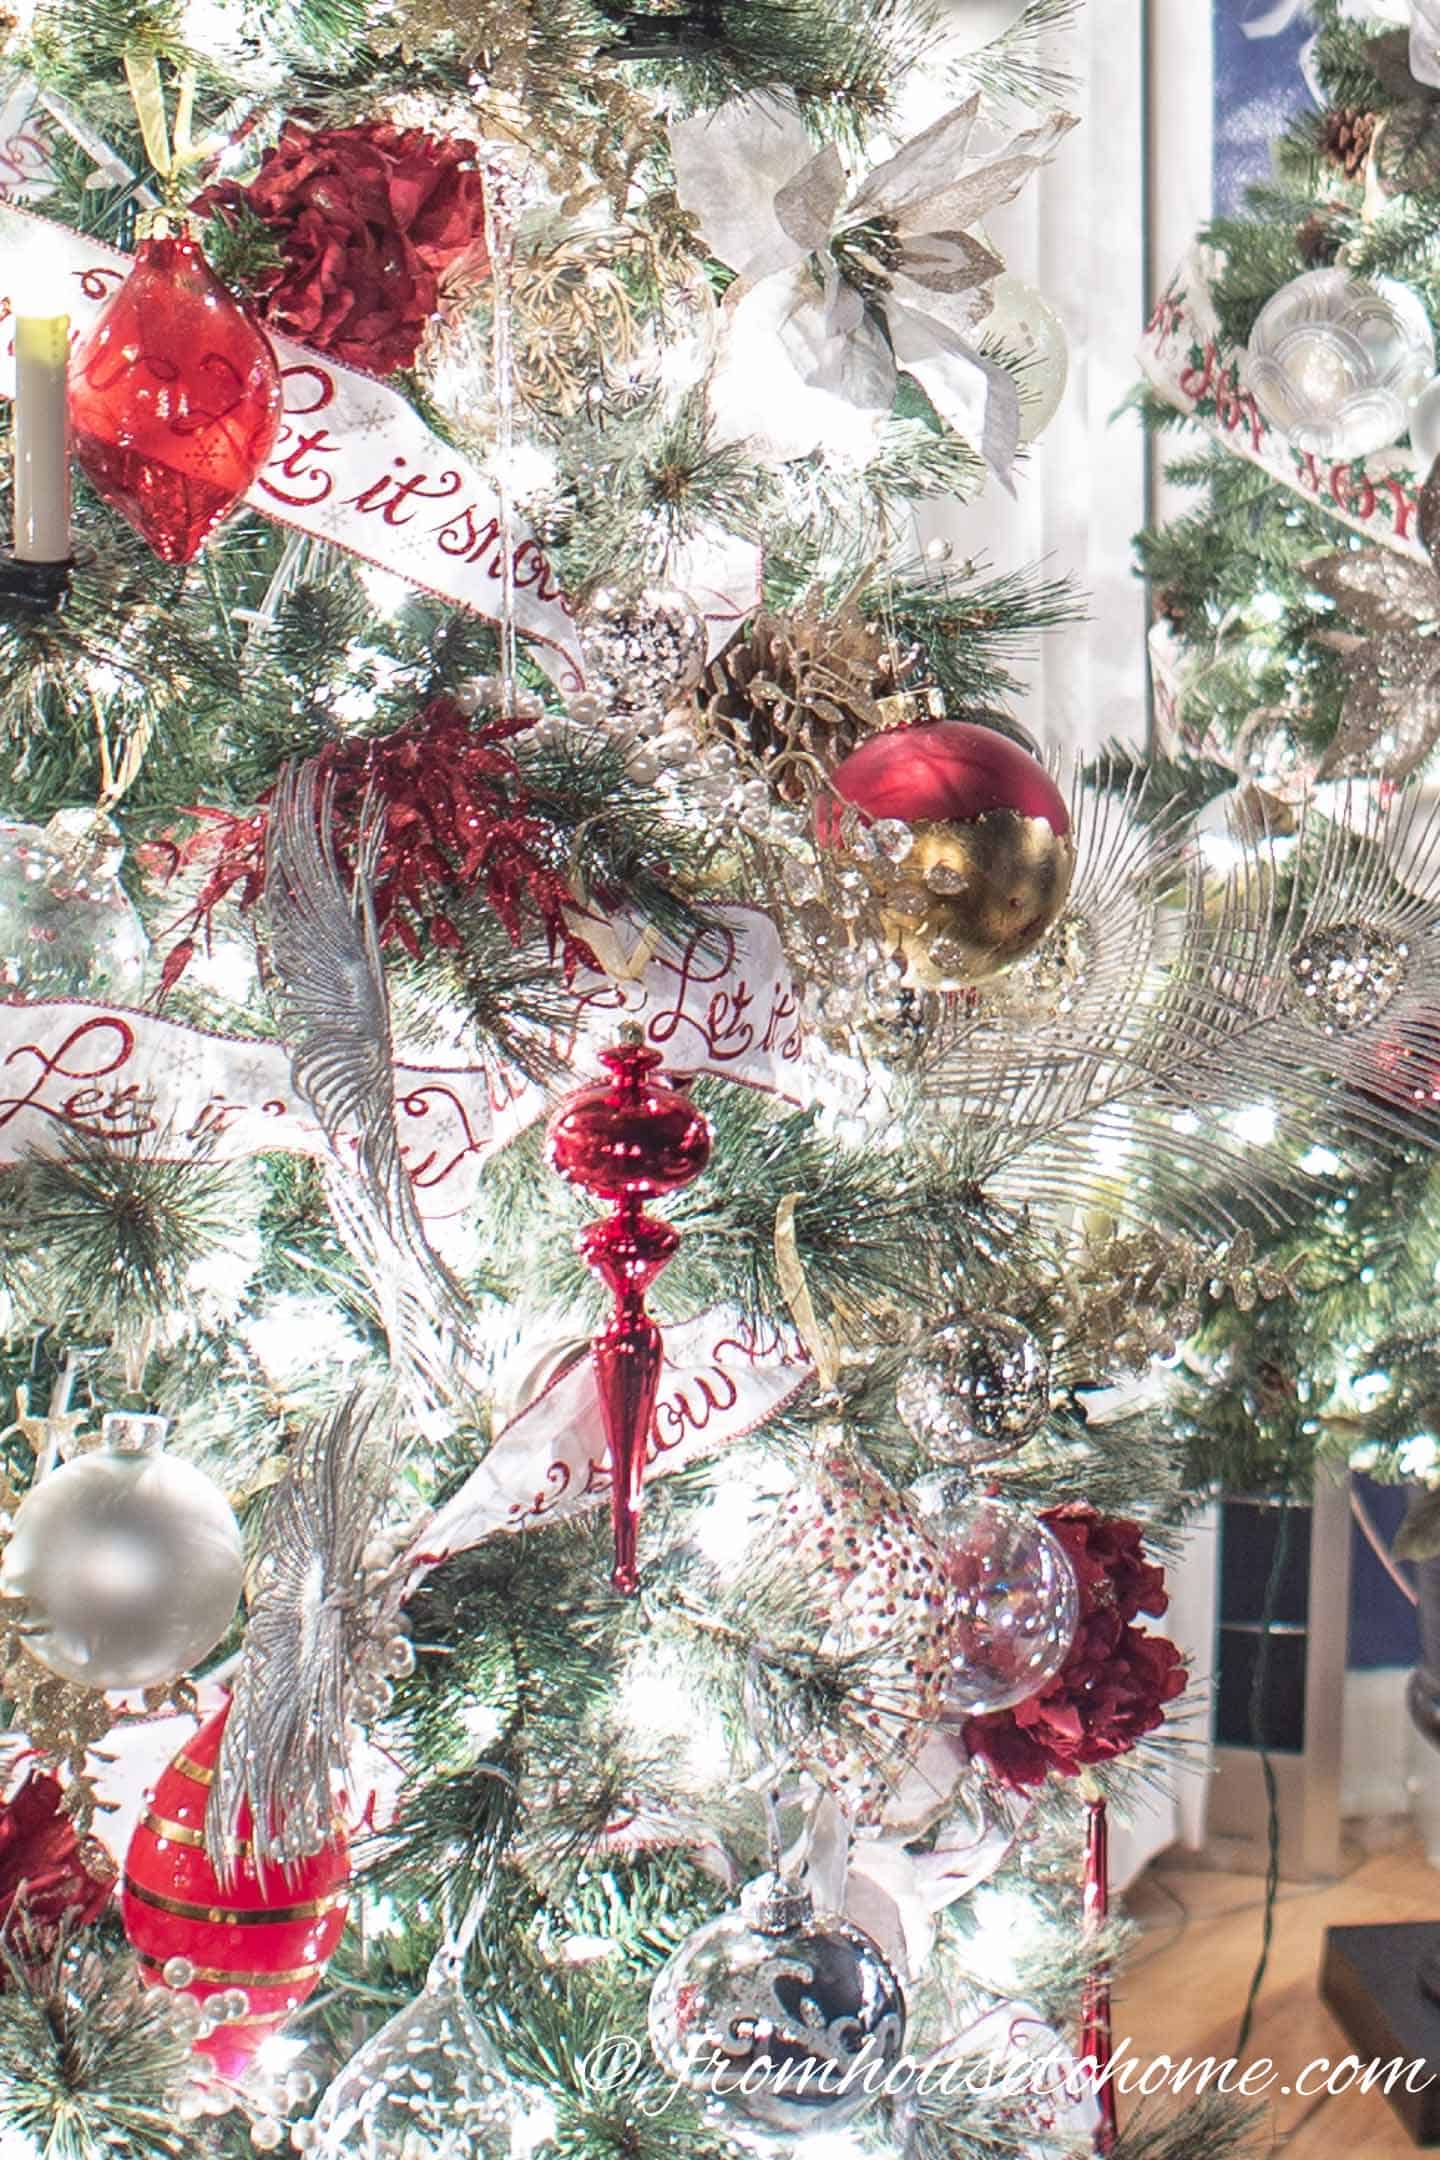 Close up of the red, white and gold ornaments and ribbons on a Christmas tree